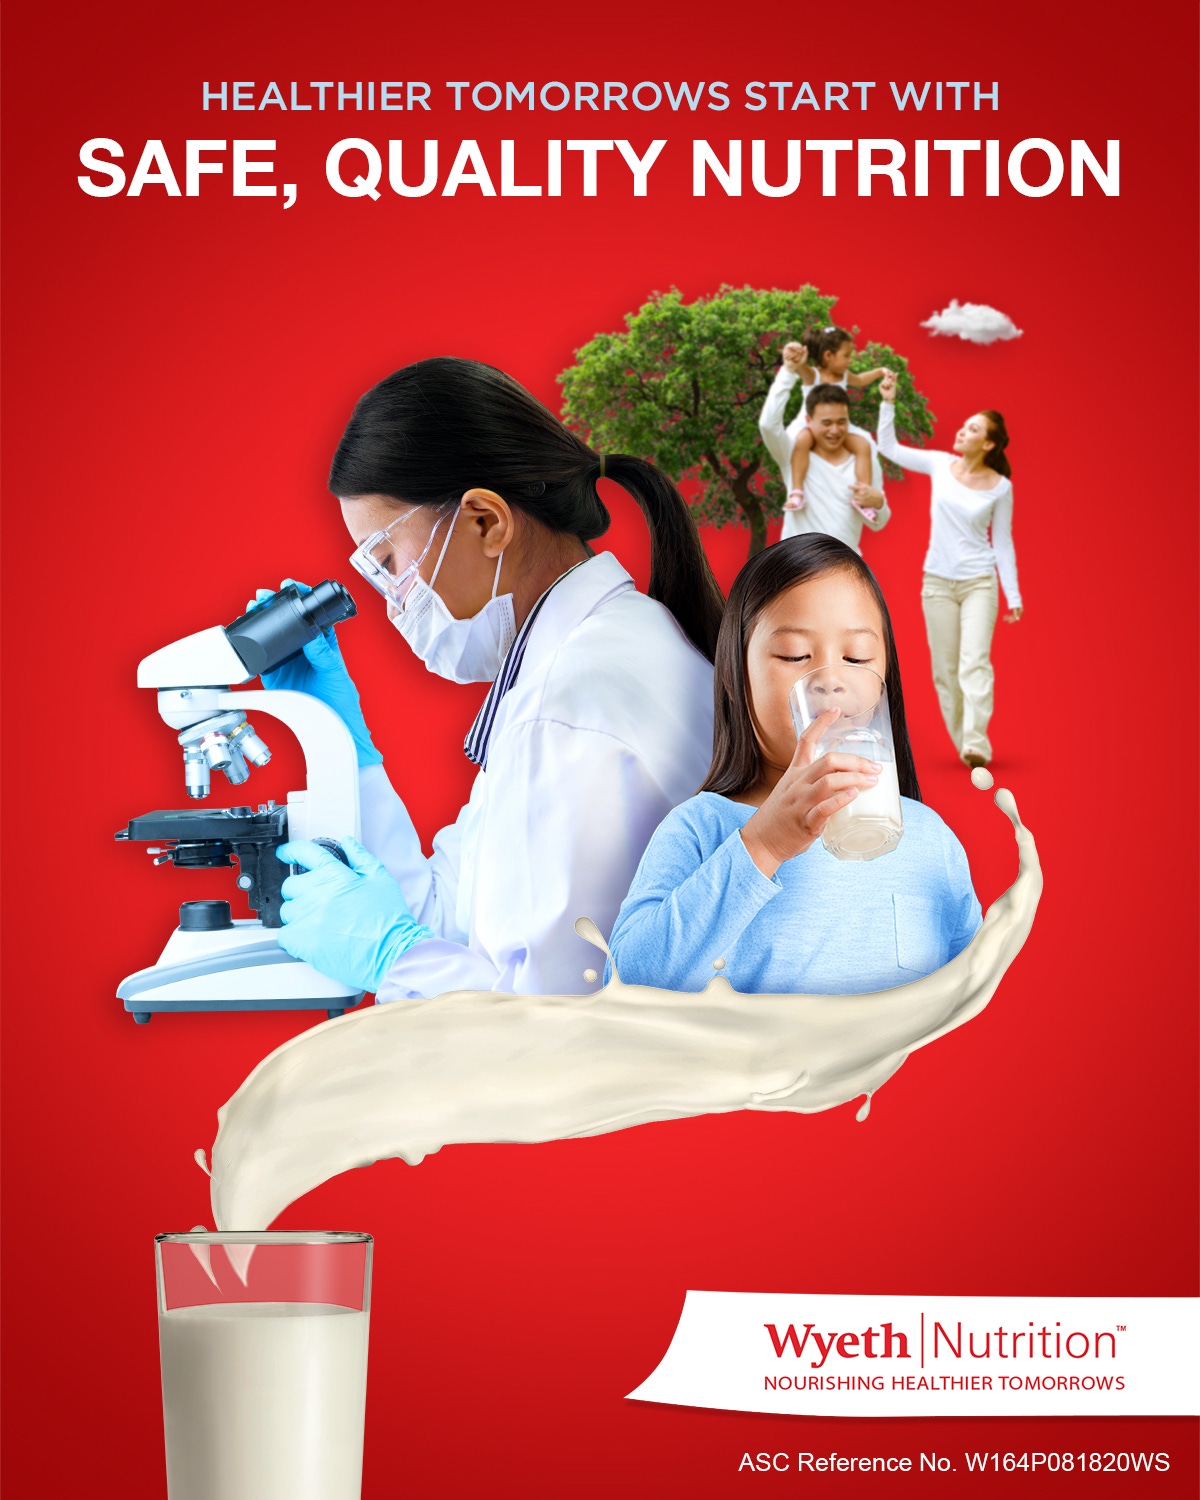 Whatever Tomorrow Brings, Wyeth Nutrition will be there